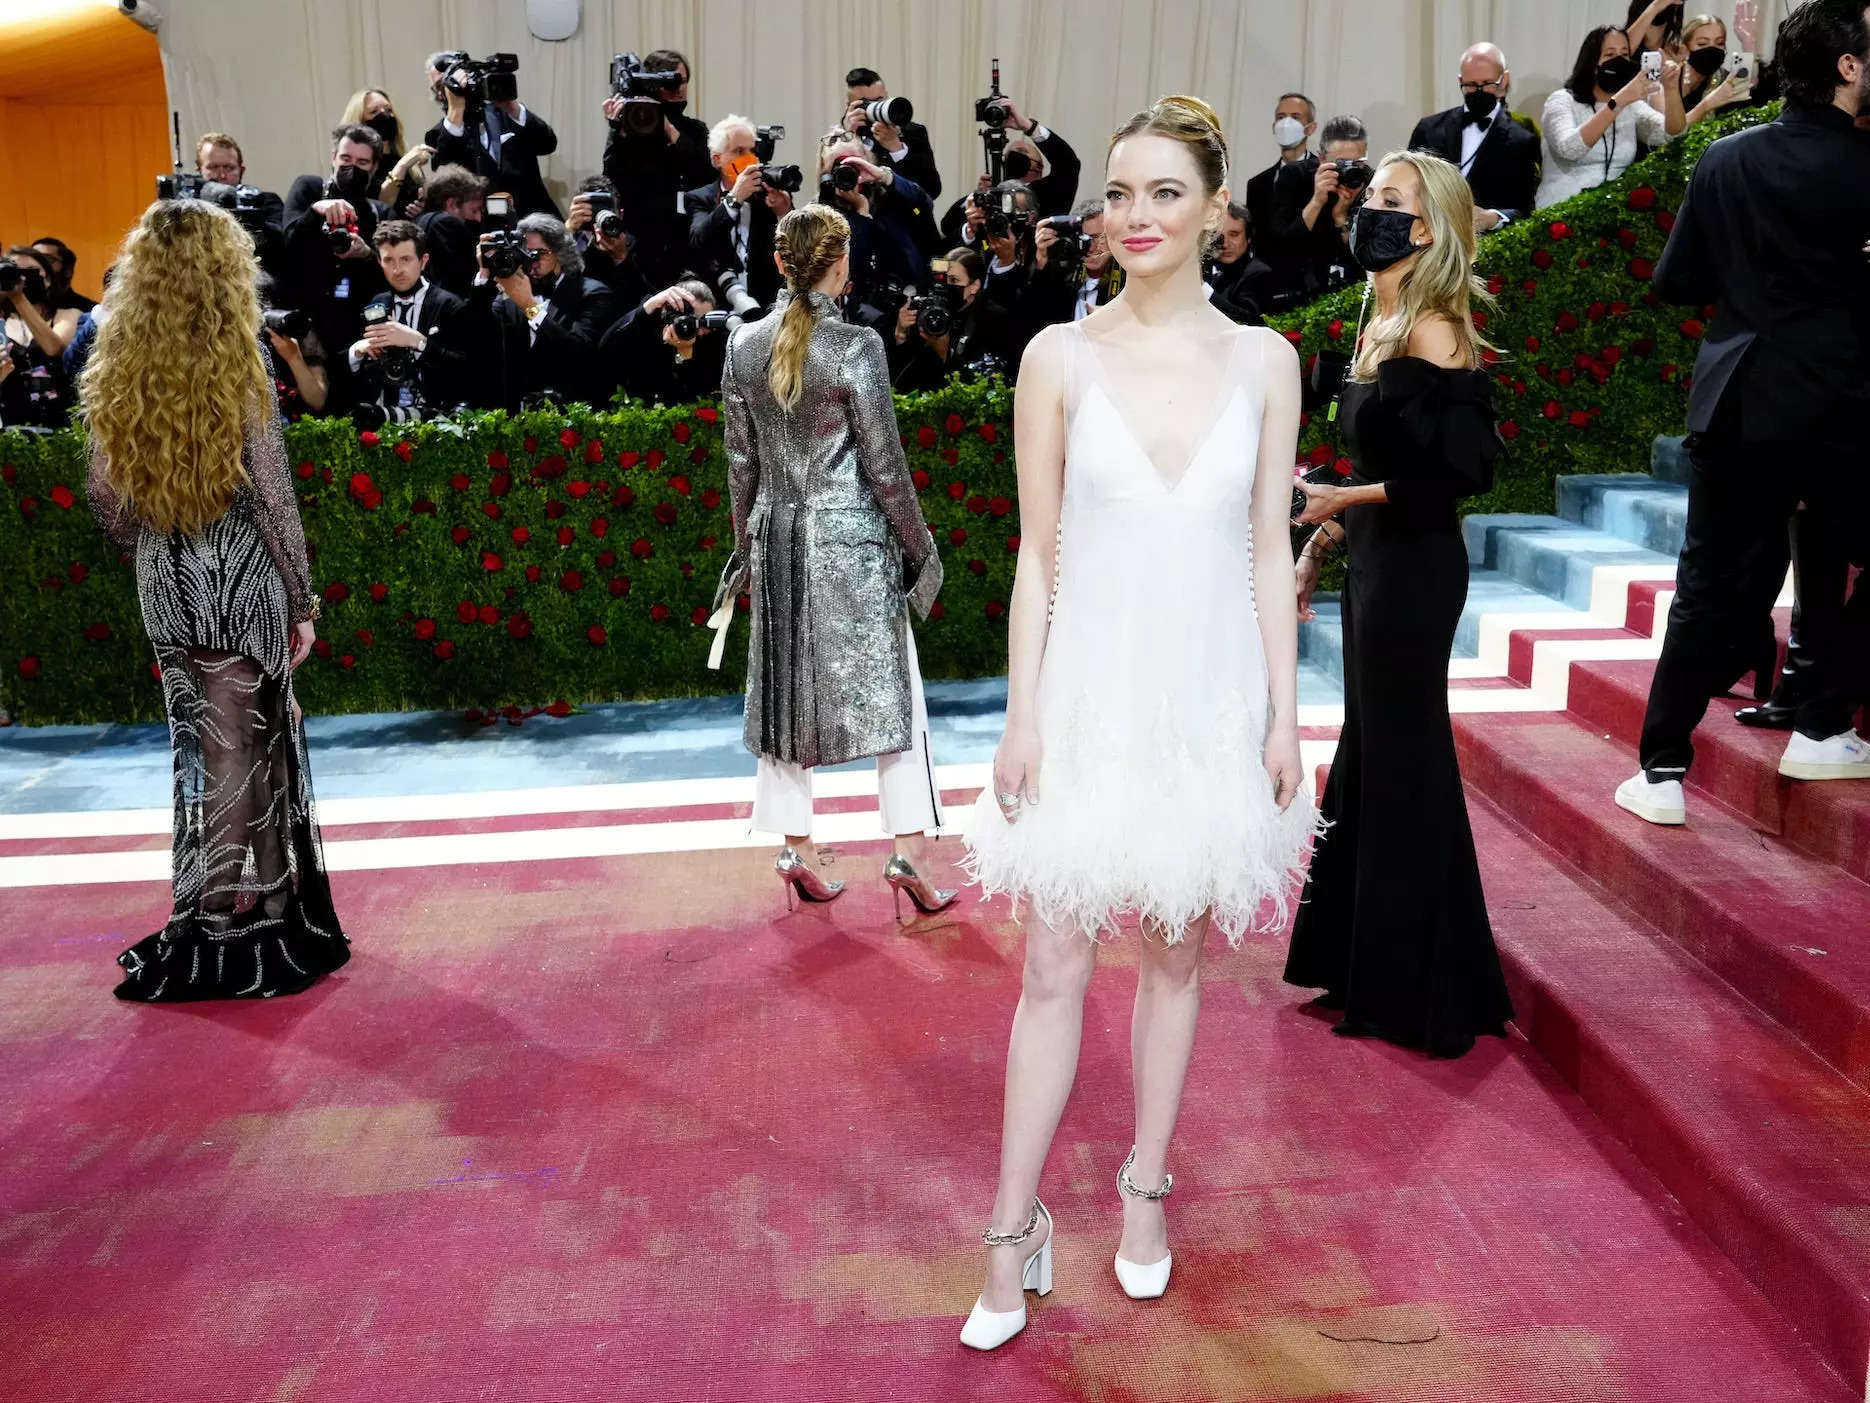 Emma Stone Rewears Her Wedding Afterparty Dress at the Met Gala